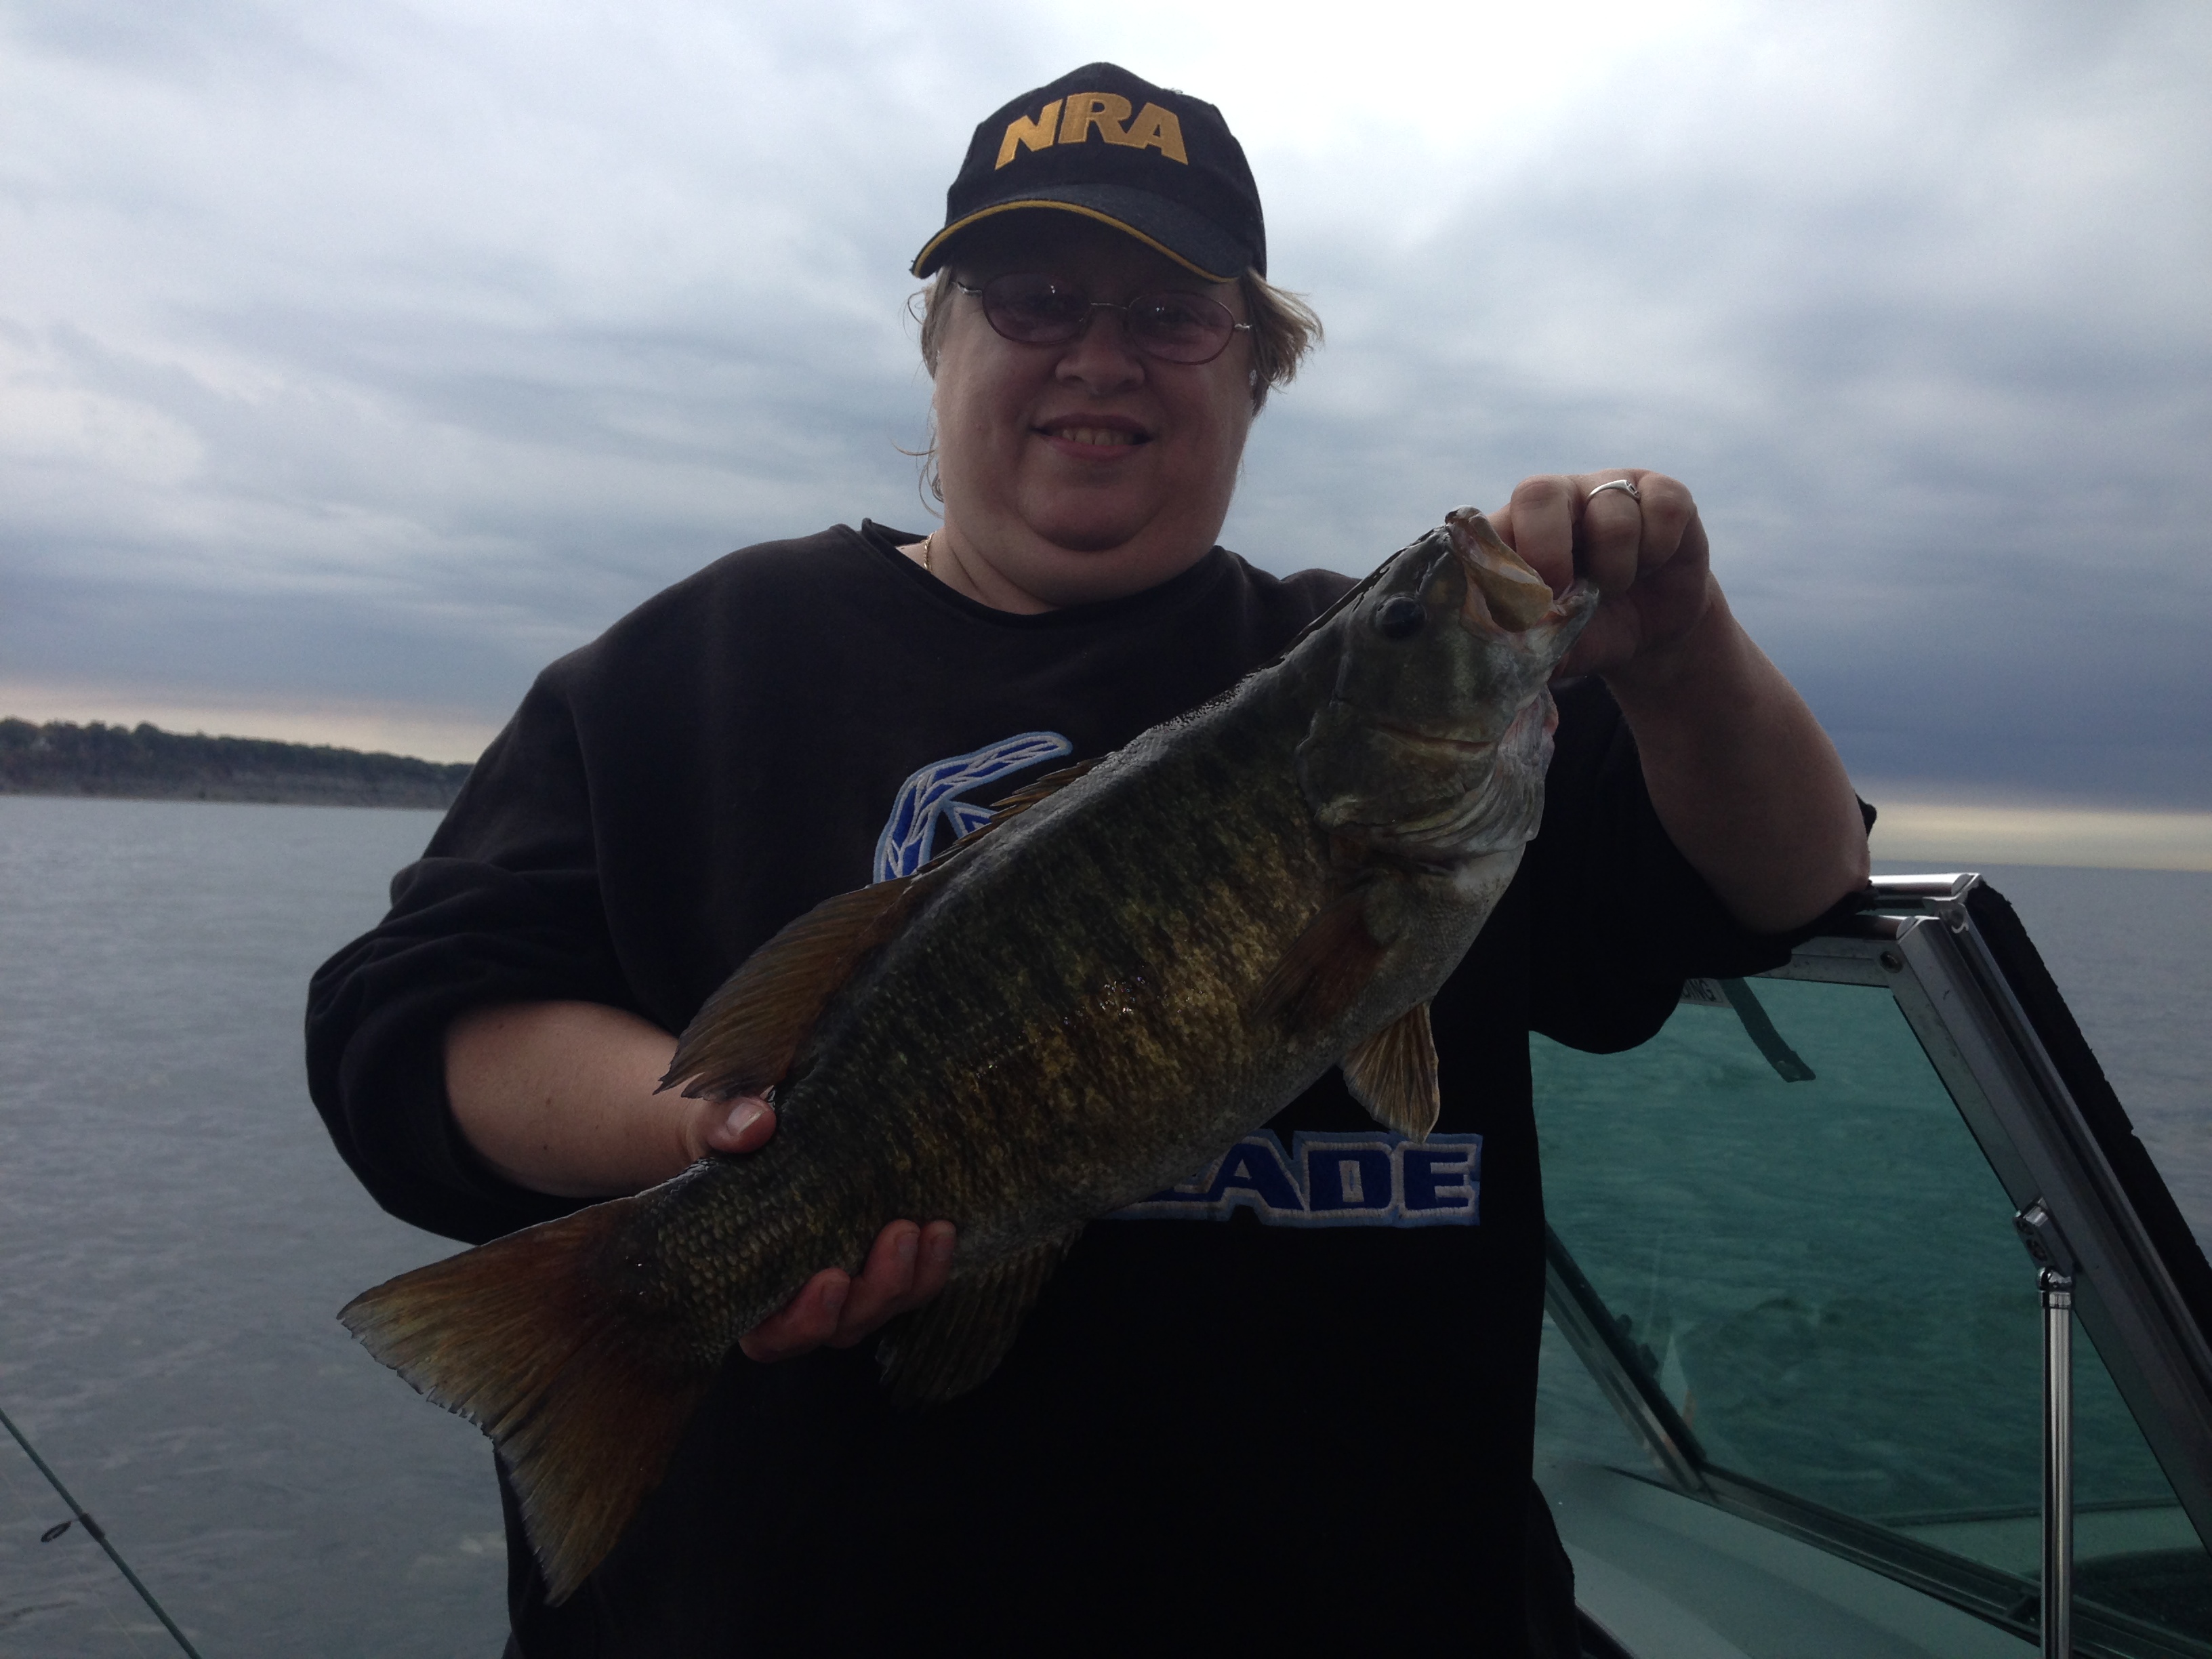 Some pictures from October fishing on Lake Erie near